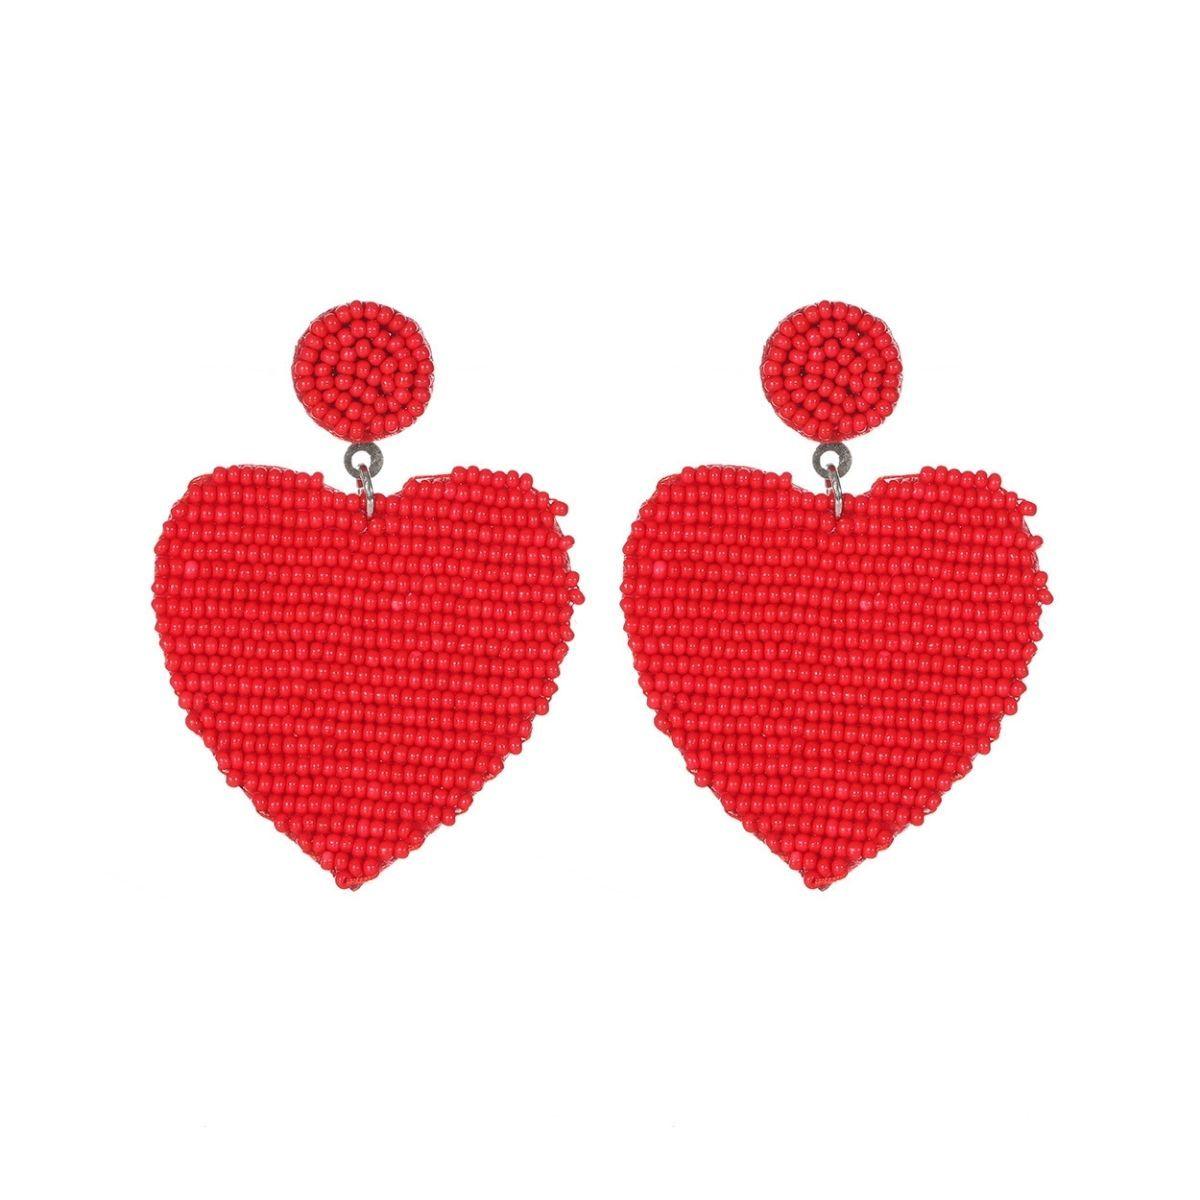 Rock Your Look with Red Heart Earrings: Get Yours Now!